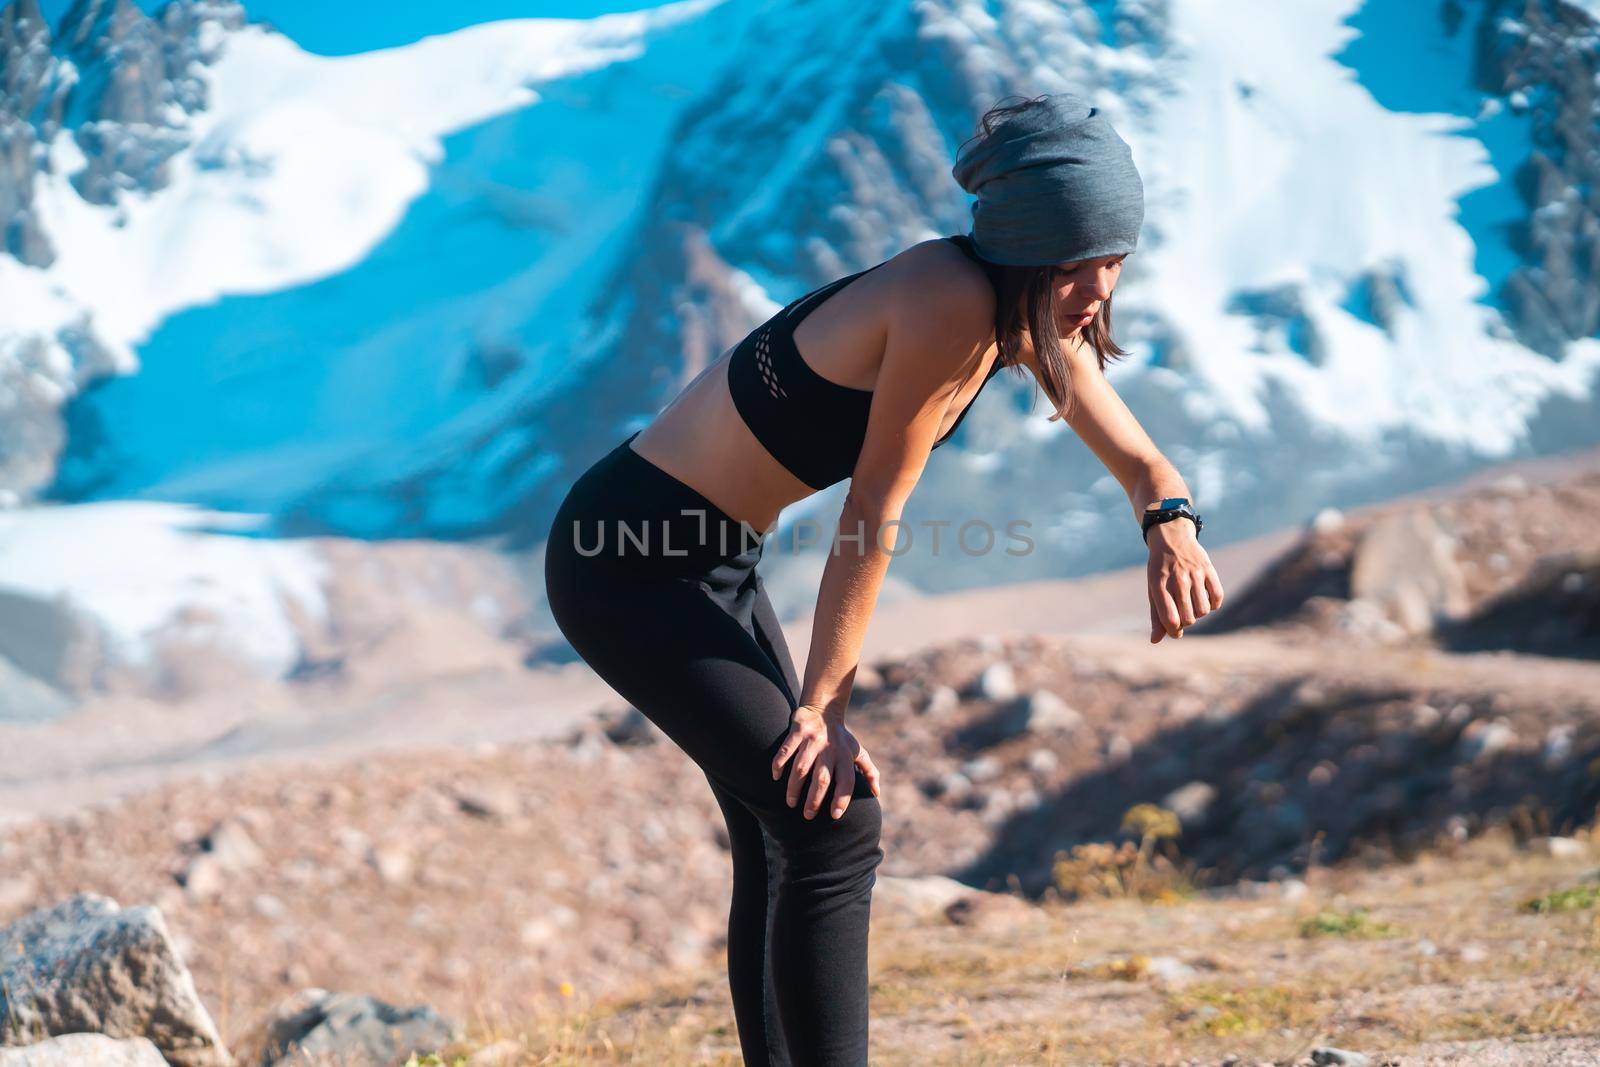 A young athletic girl looks at a smartwatch on her hand, checks her pulse, takes a break after jogging on trails in the snowy mountains. Woman runs outdoors in a mountainous beautiful area.